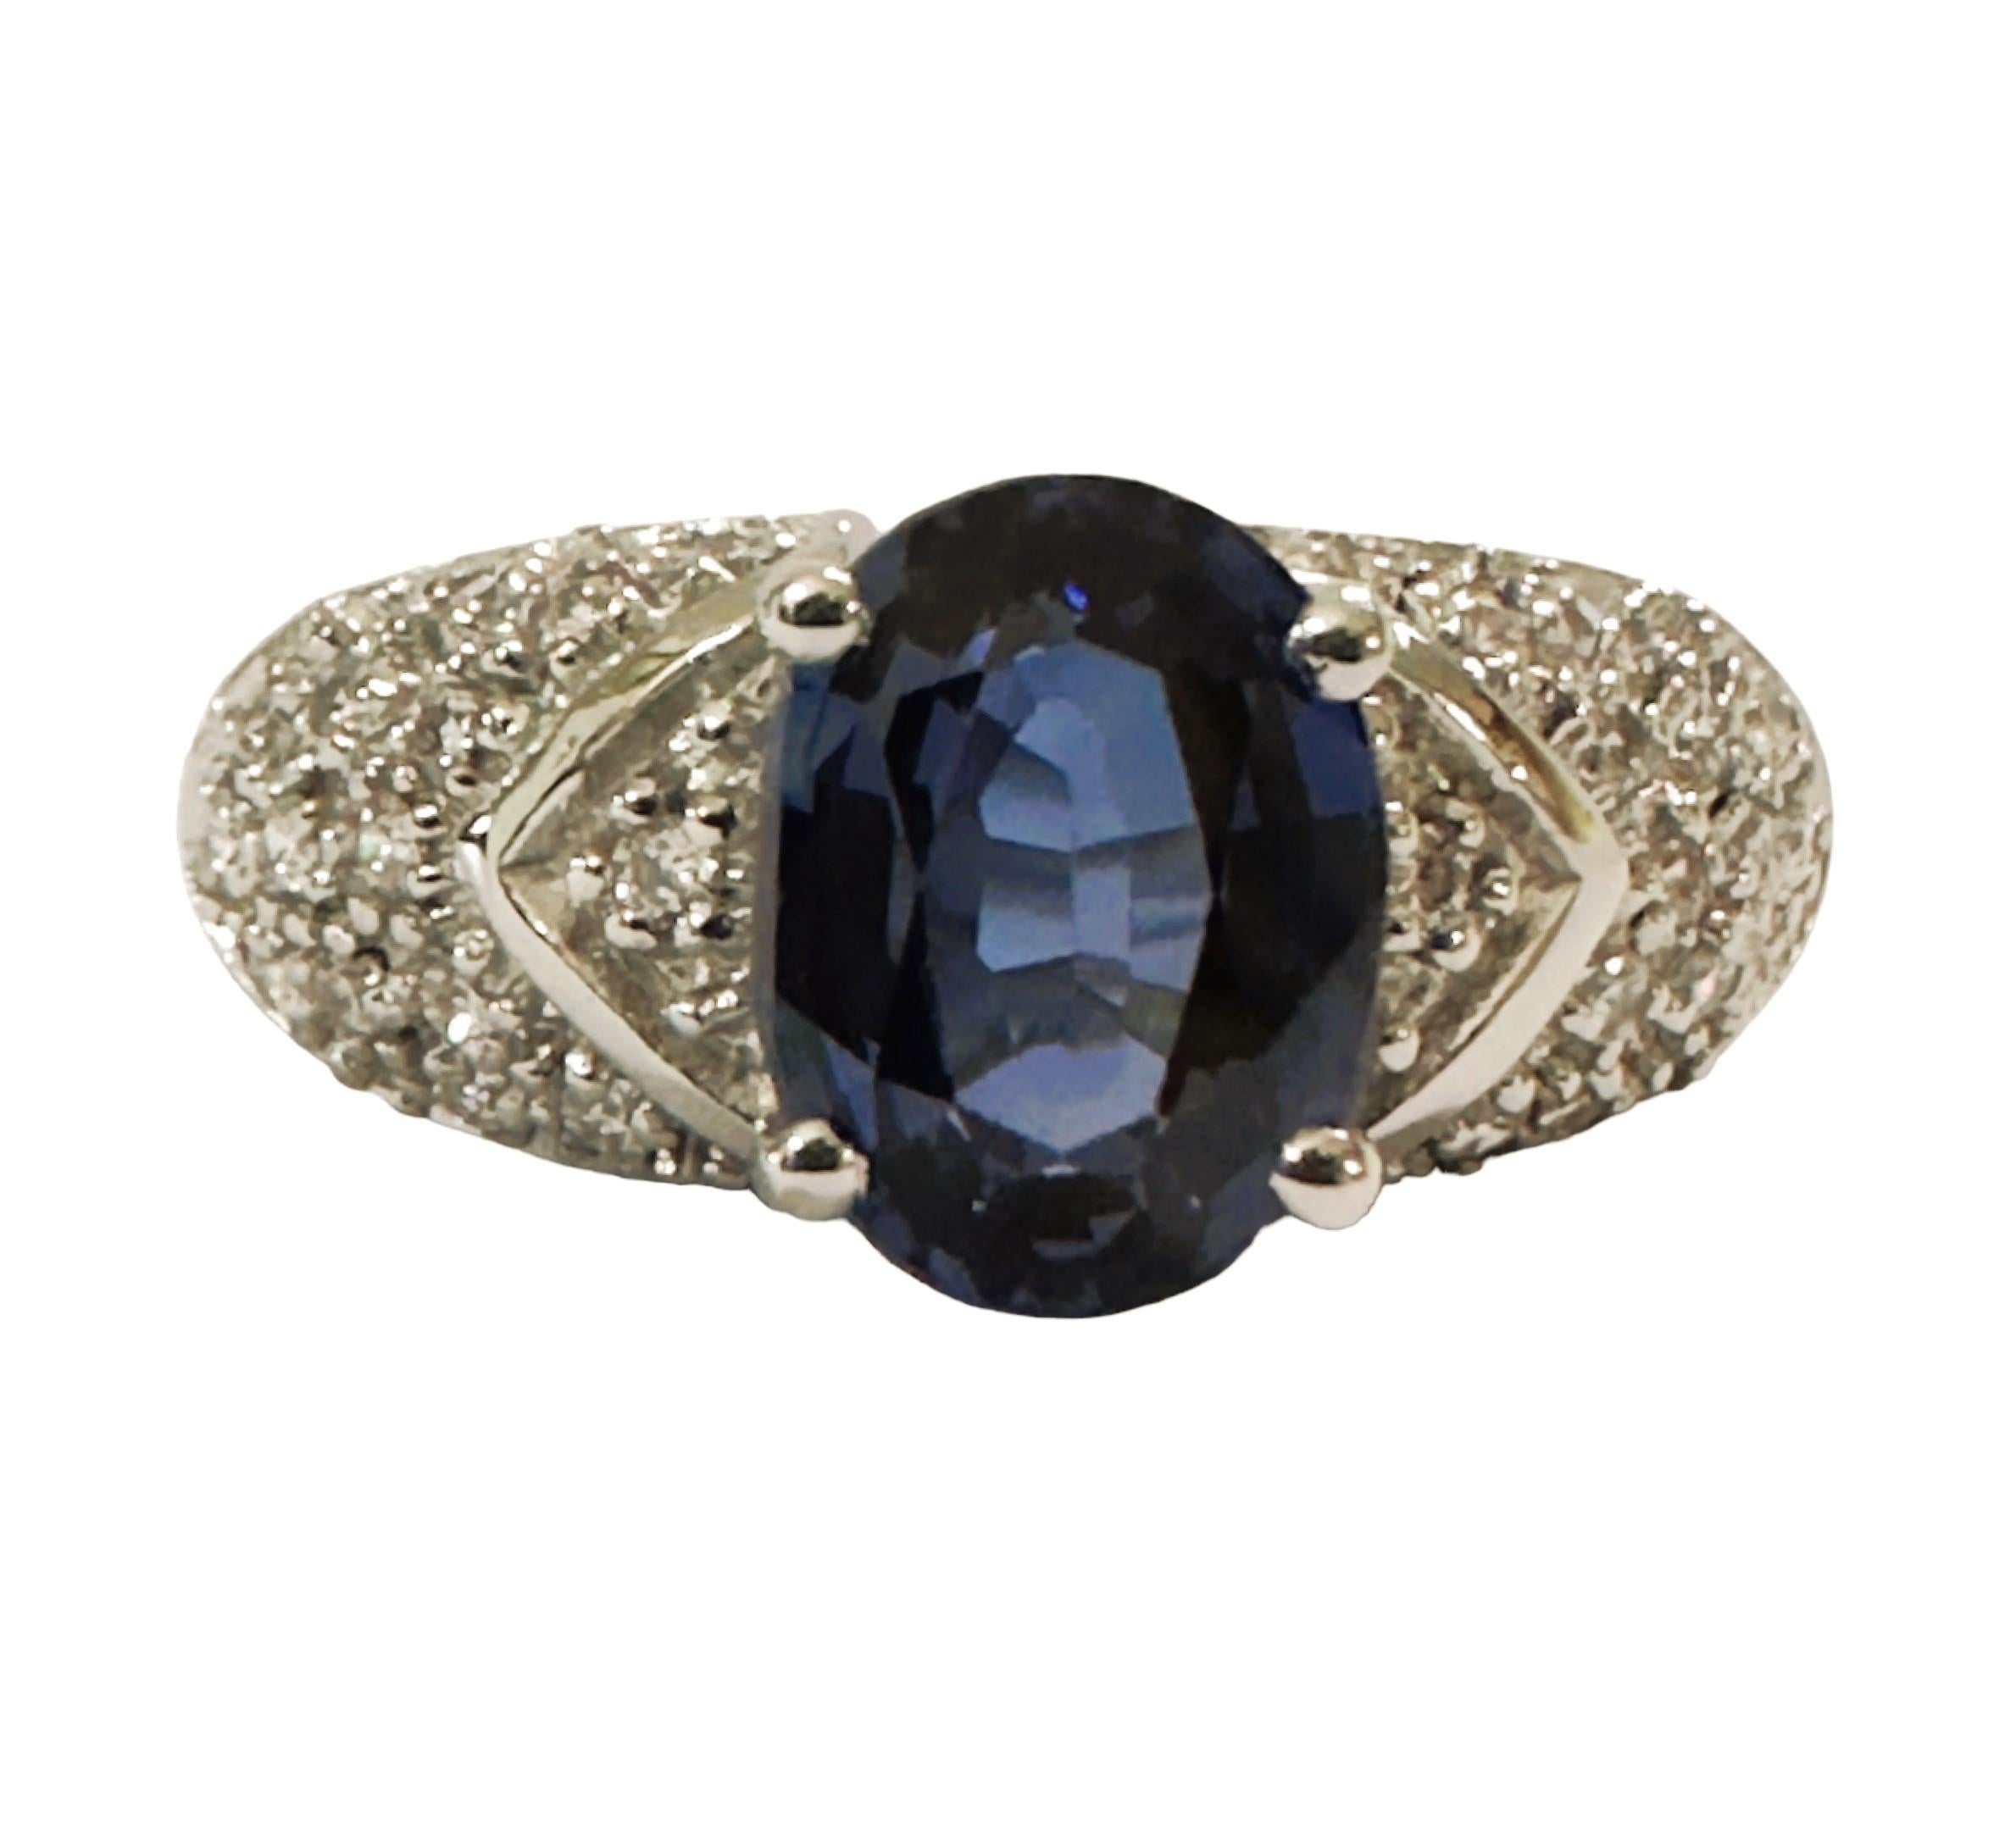 What a beautiful ring!  The ring is a size 6.75.  The stones are from Africa and are just exquisite.  The 